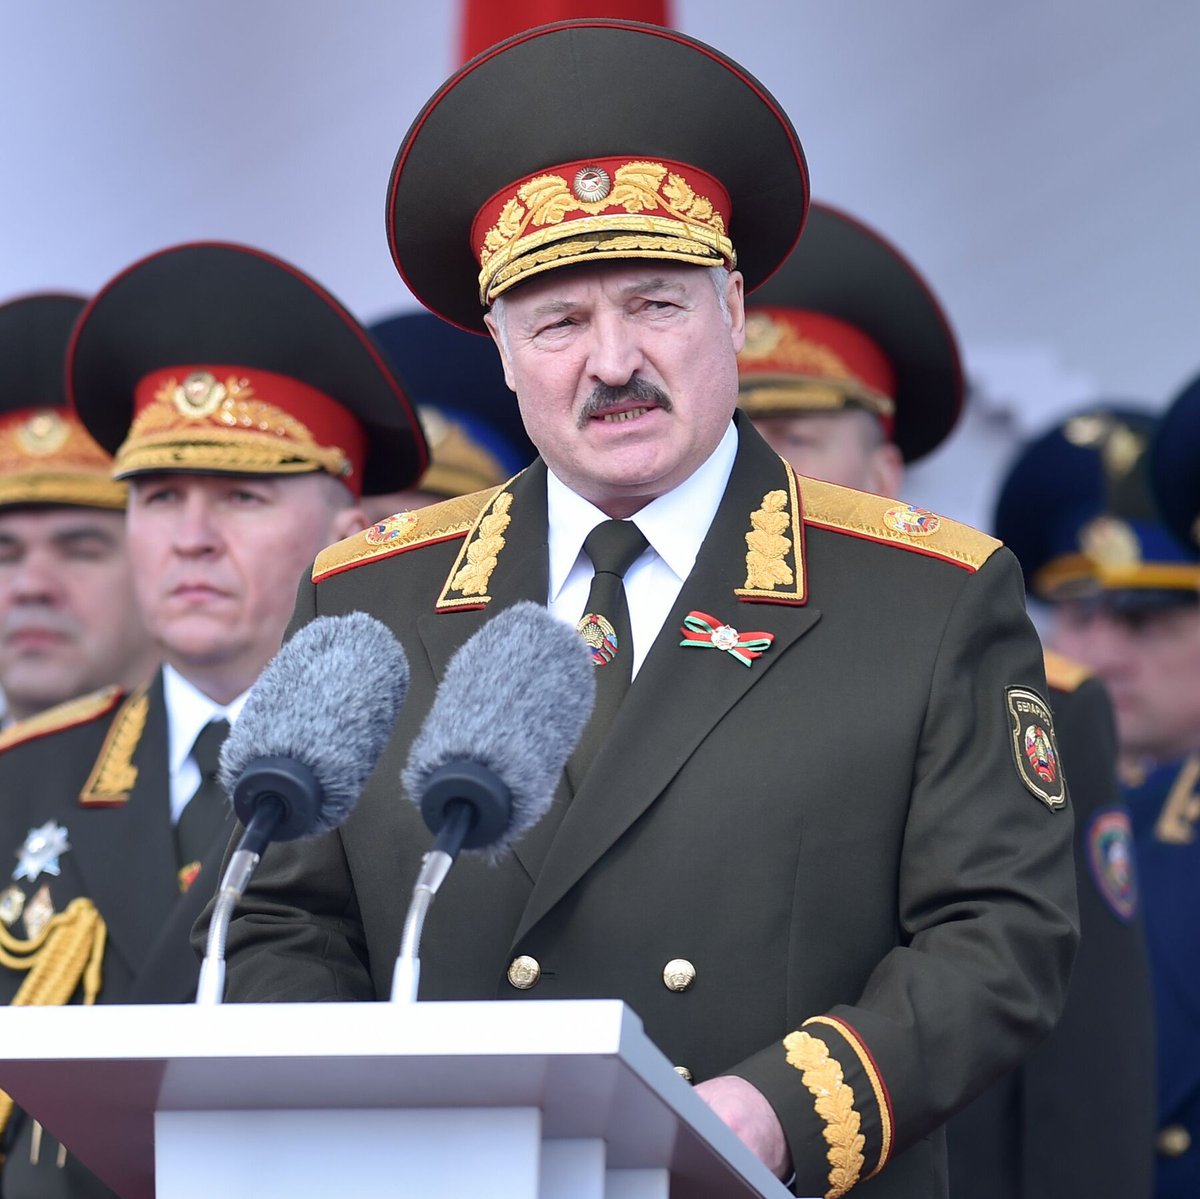 Lukashenko: 'One thing is clear: they [West] really want to drag us into a war. While they are provoking us, digging trenches, modernizing military infrastructure and weapons. I have already said: we are building a peaceful life on the other side of the border. We don't build…